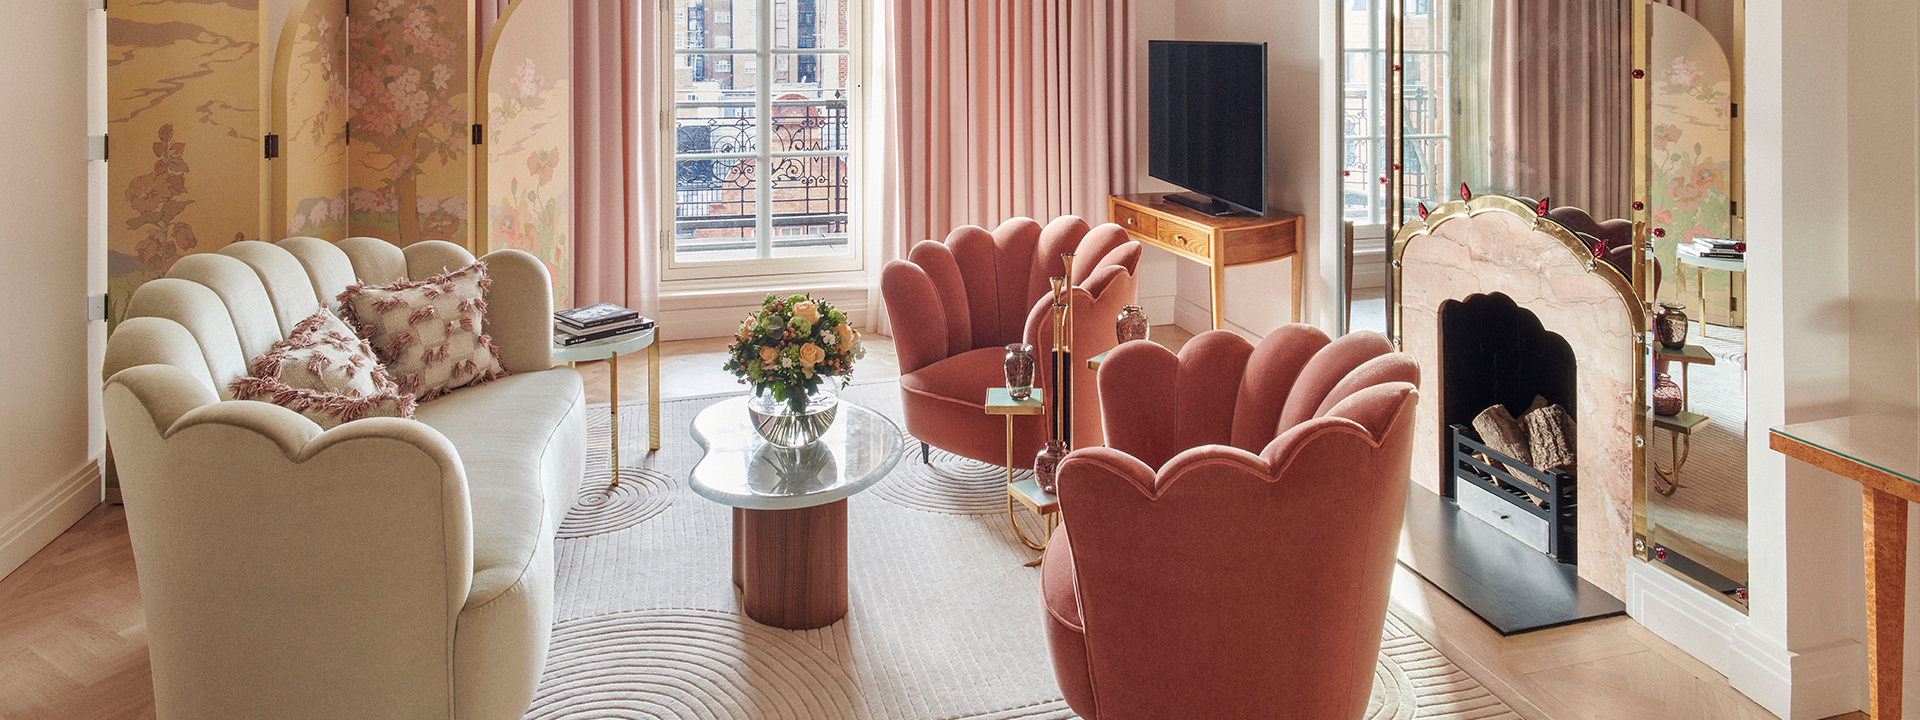 Pink armchairs and a sofa by the fireplace in the sitting room from the Mayfair Terrace Suite.